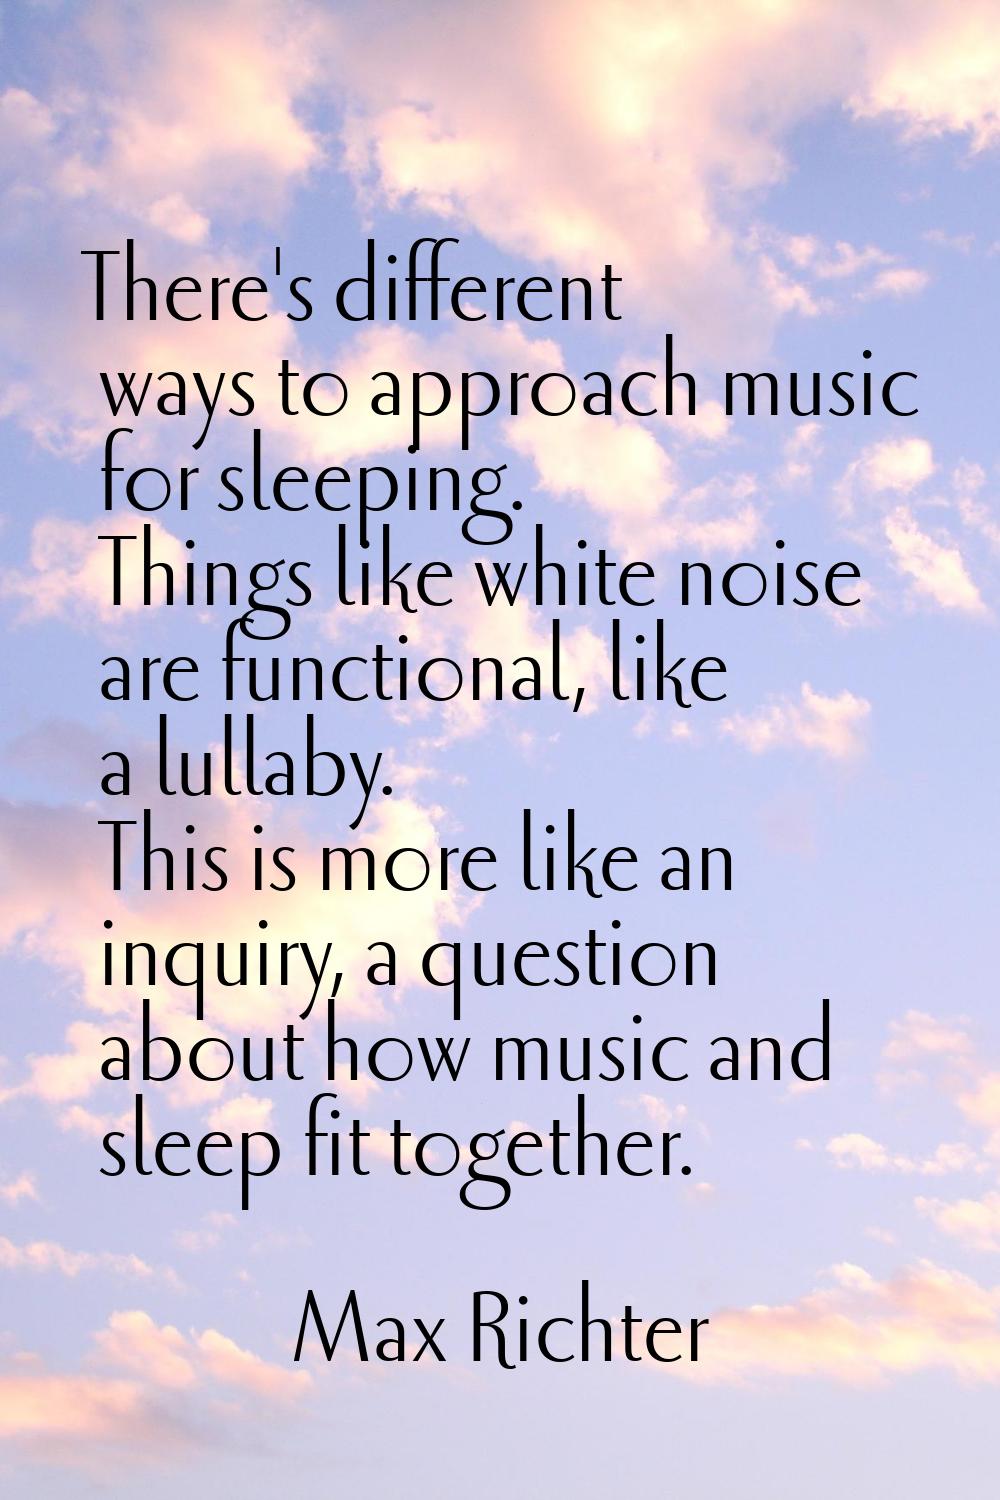 There's different ways to approach music for sleeping. Things like white noise are functional, like